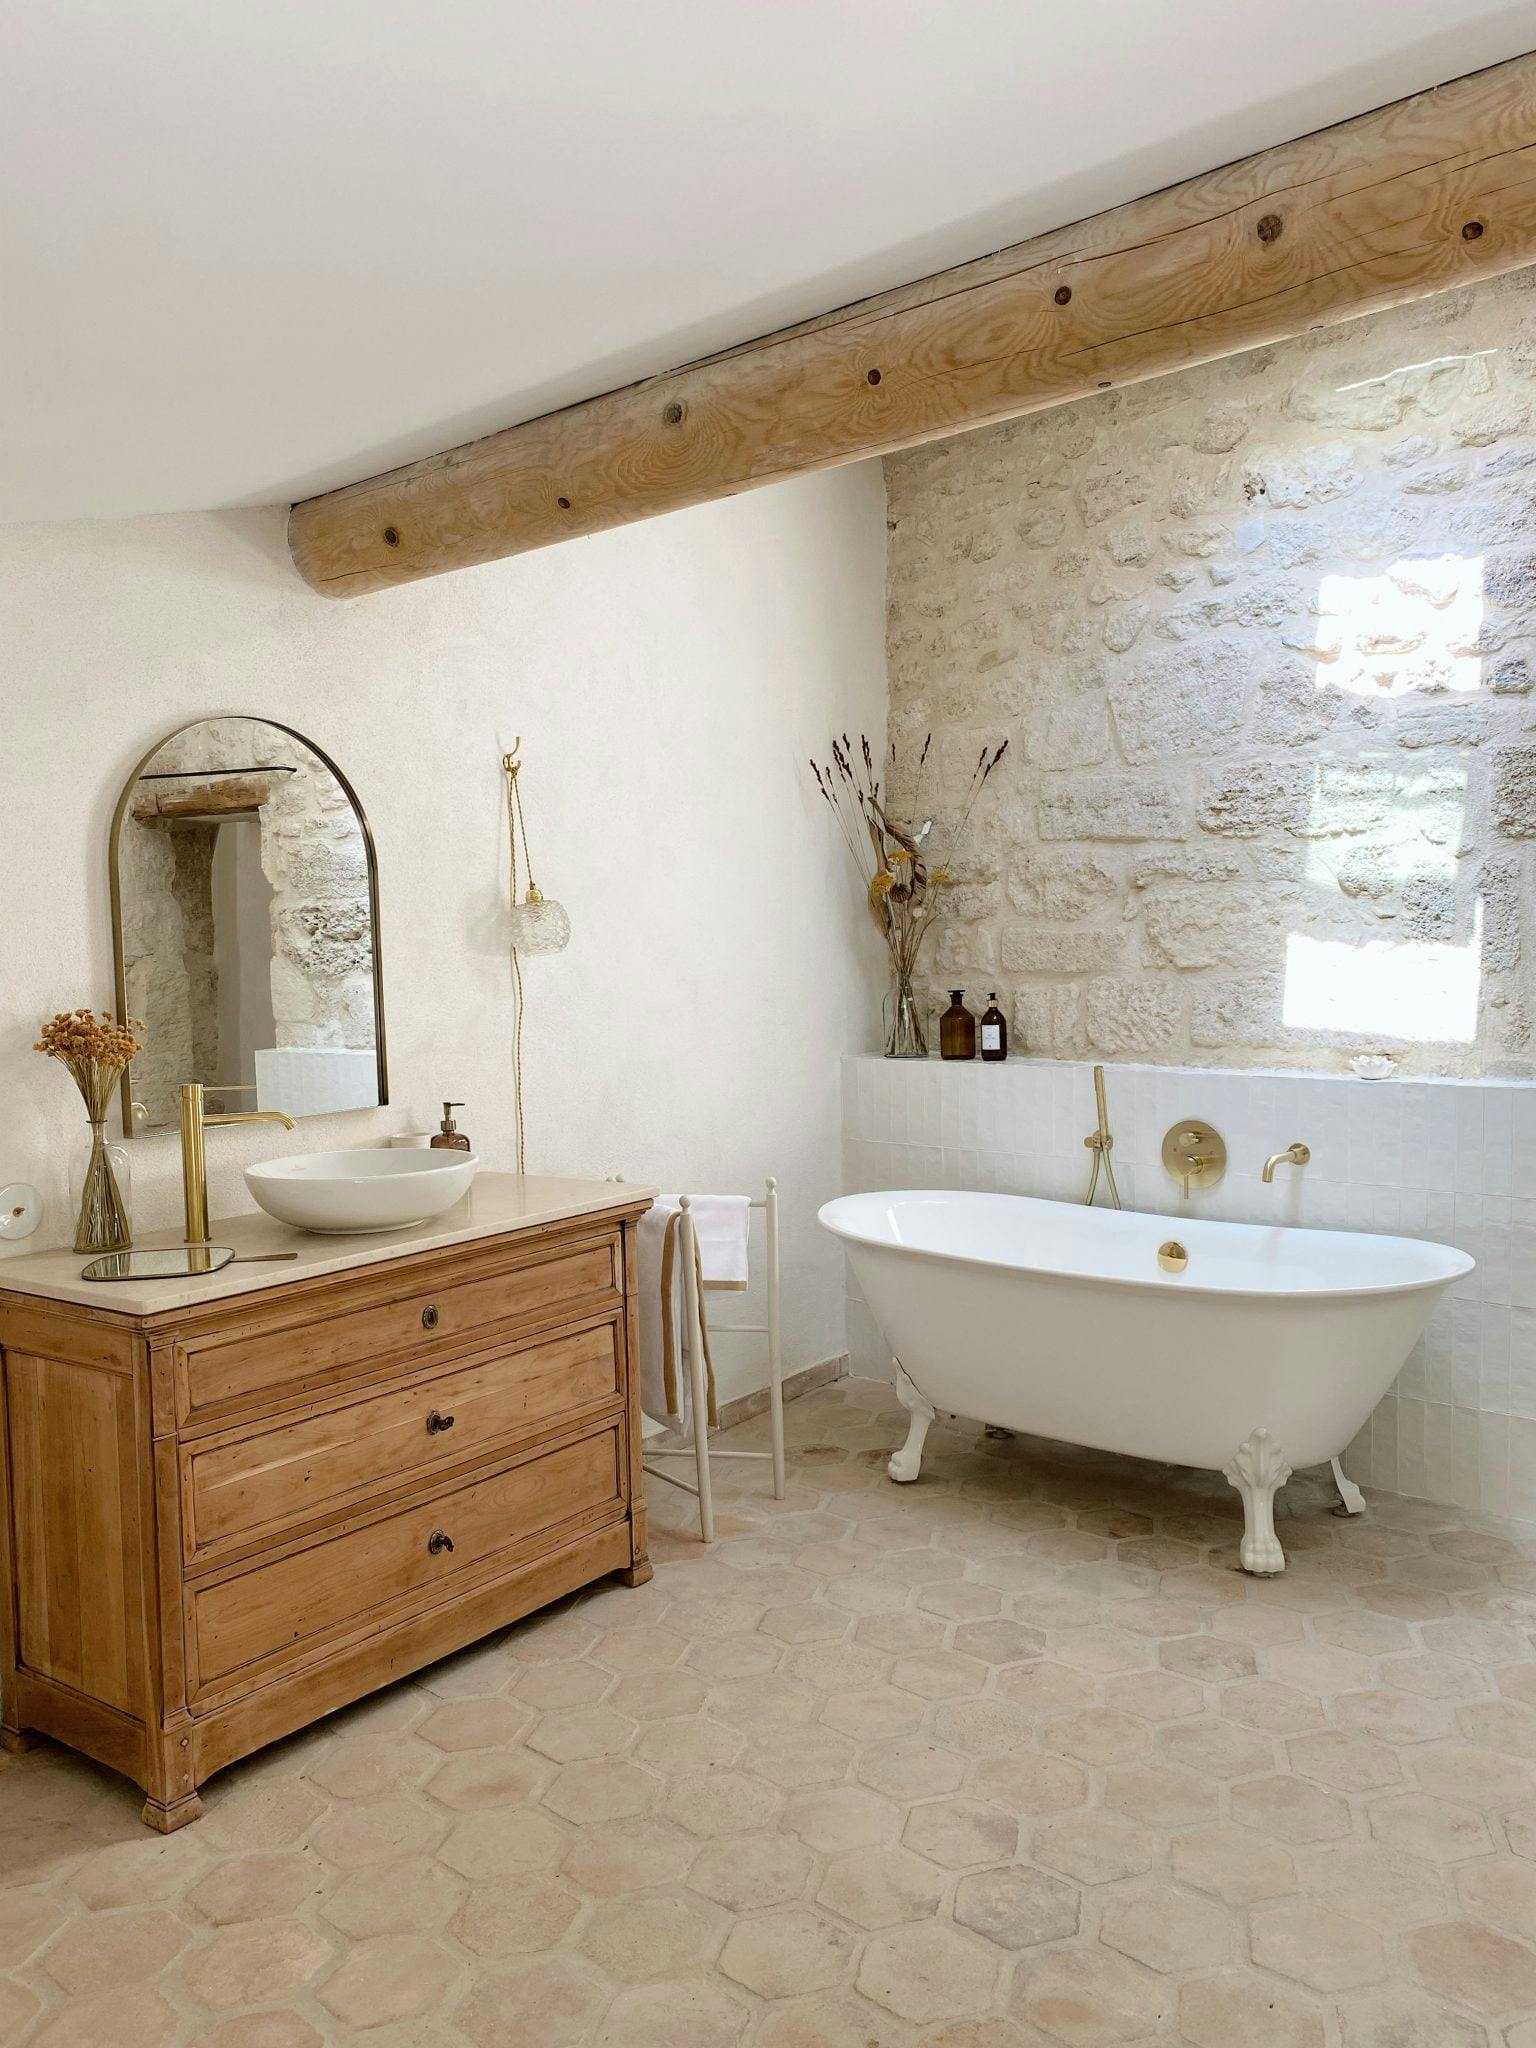 Bathroom with free-standing bathtub, wooden cabinet and washbasin, stone walls and beam